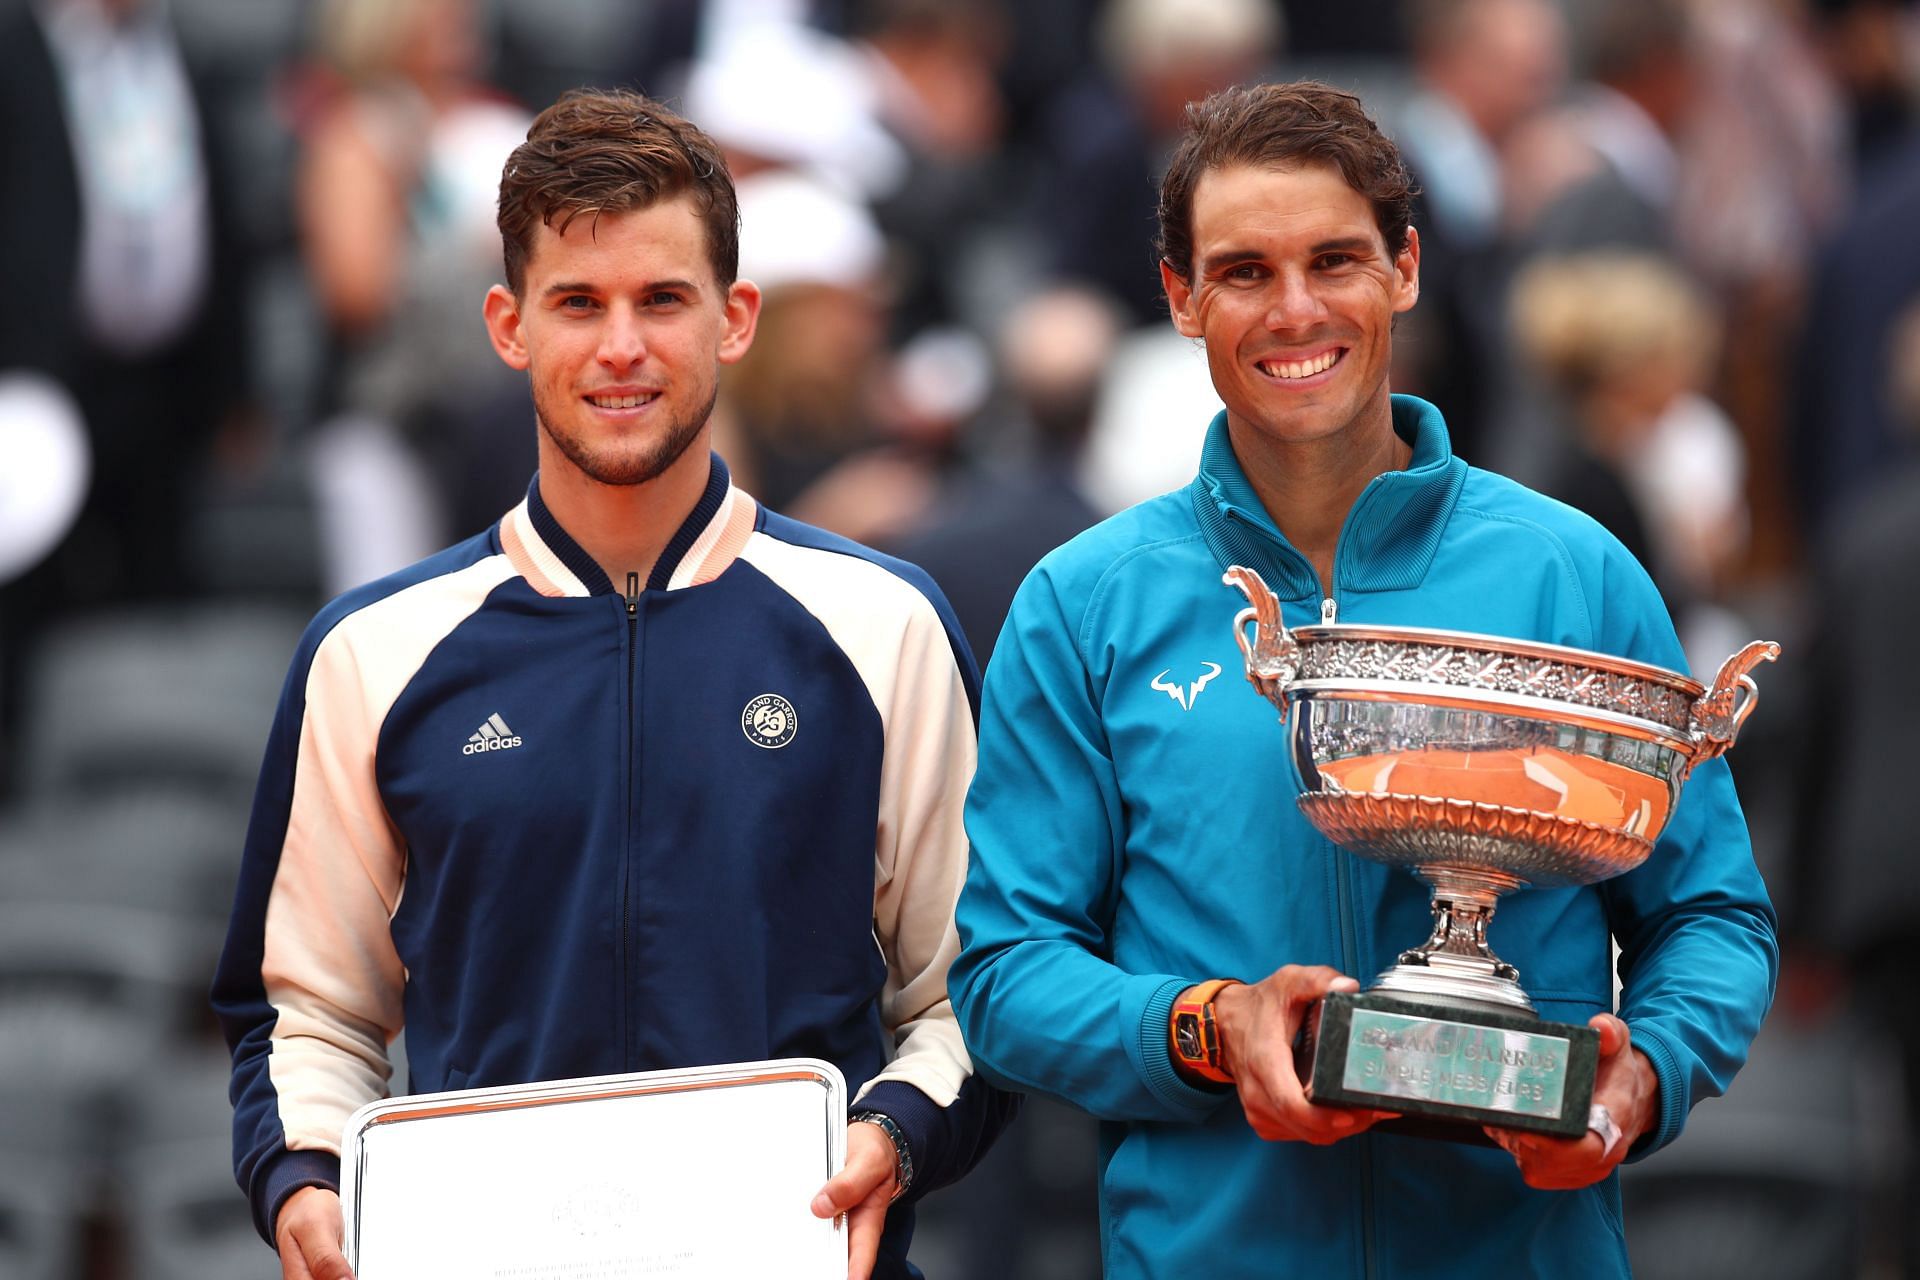 Dominic Thiem and Rafael Nadal also featured in the 2018 French Open final